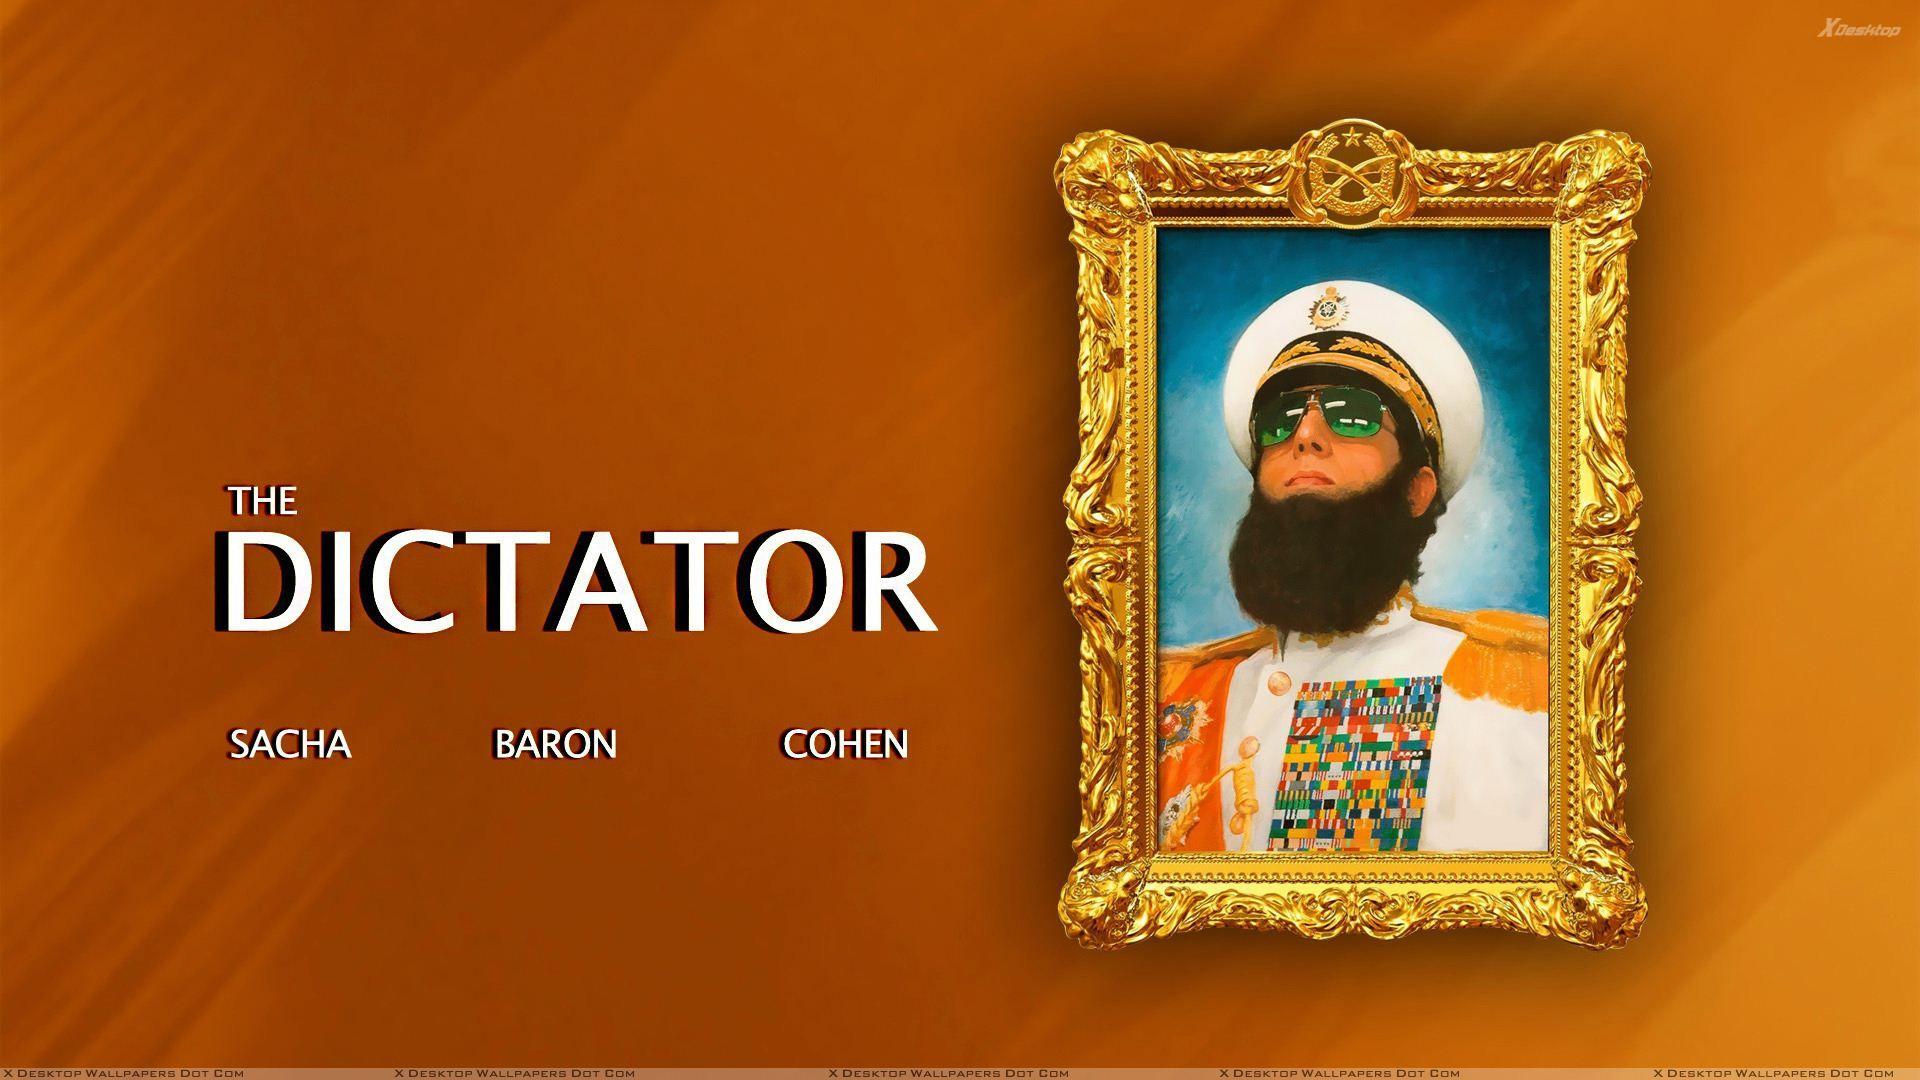 The Dictator Wallpaper, Photo & Image in HD